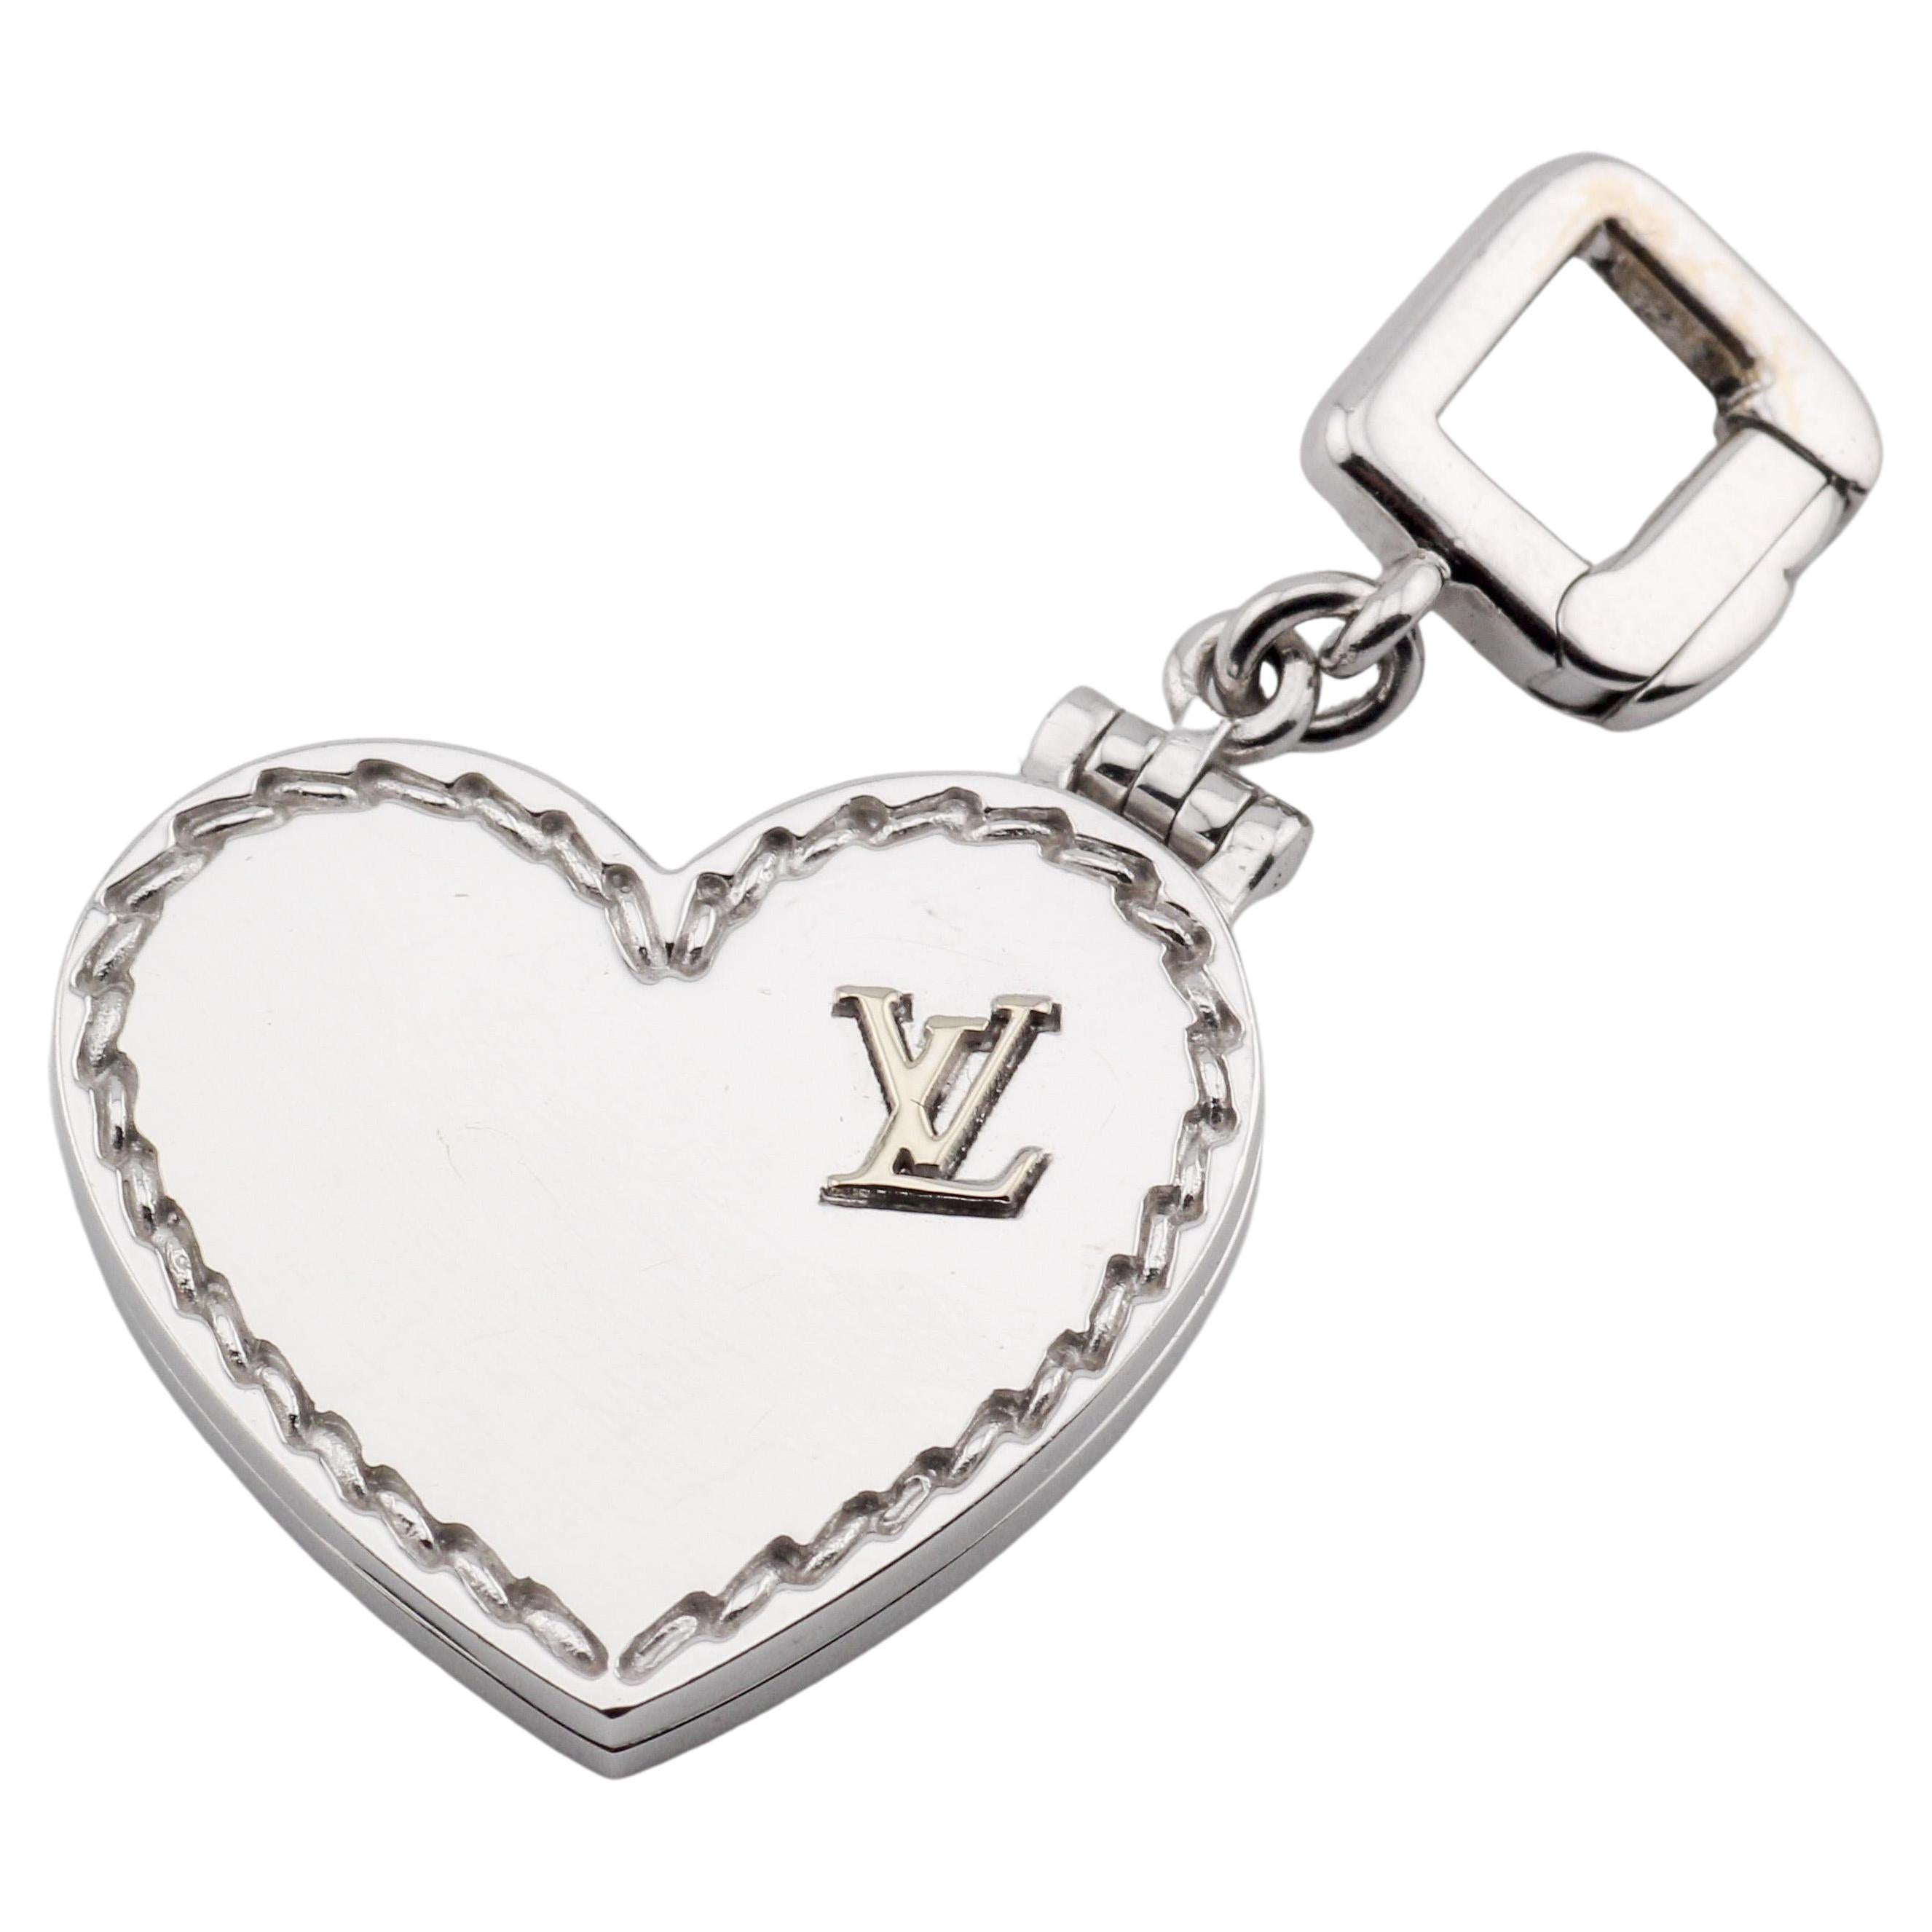 How can I tell if a Louis Vuitton bracelet is real?